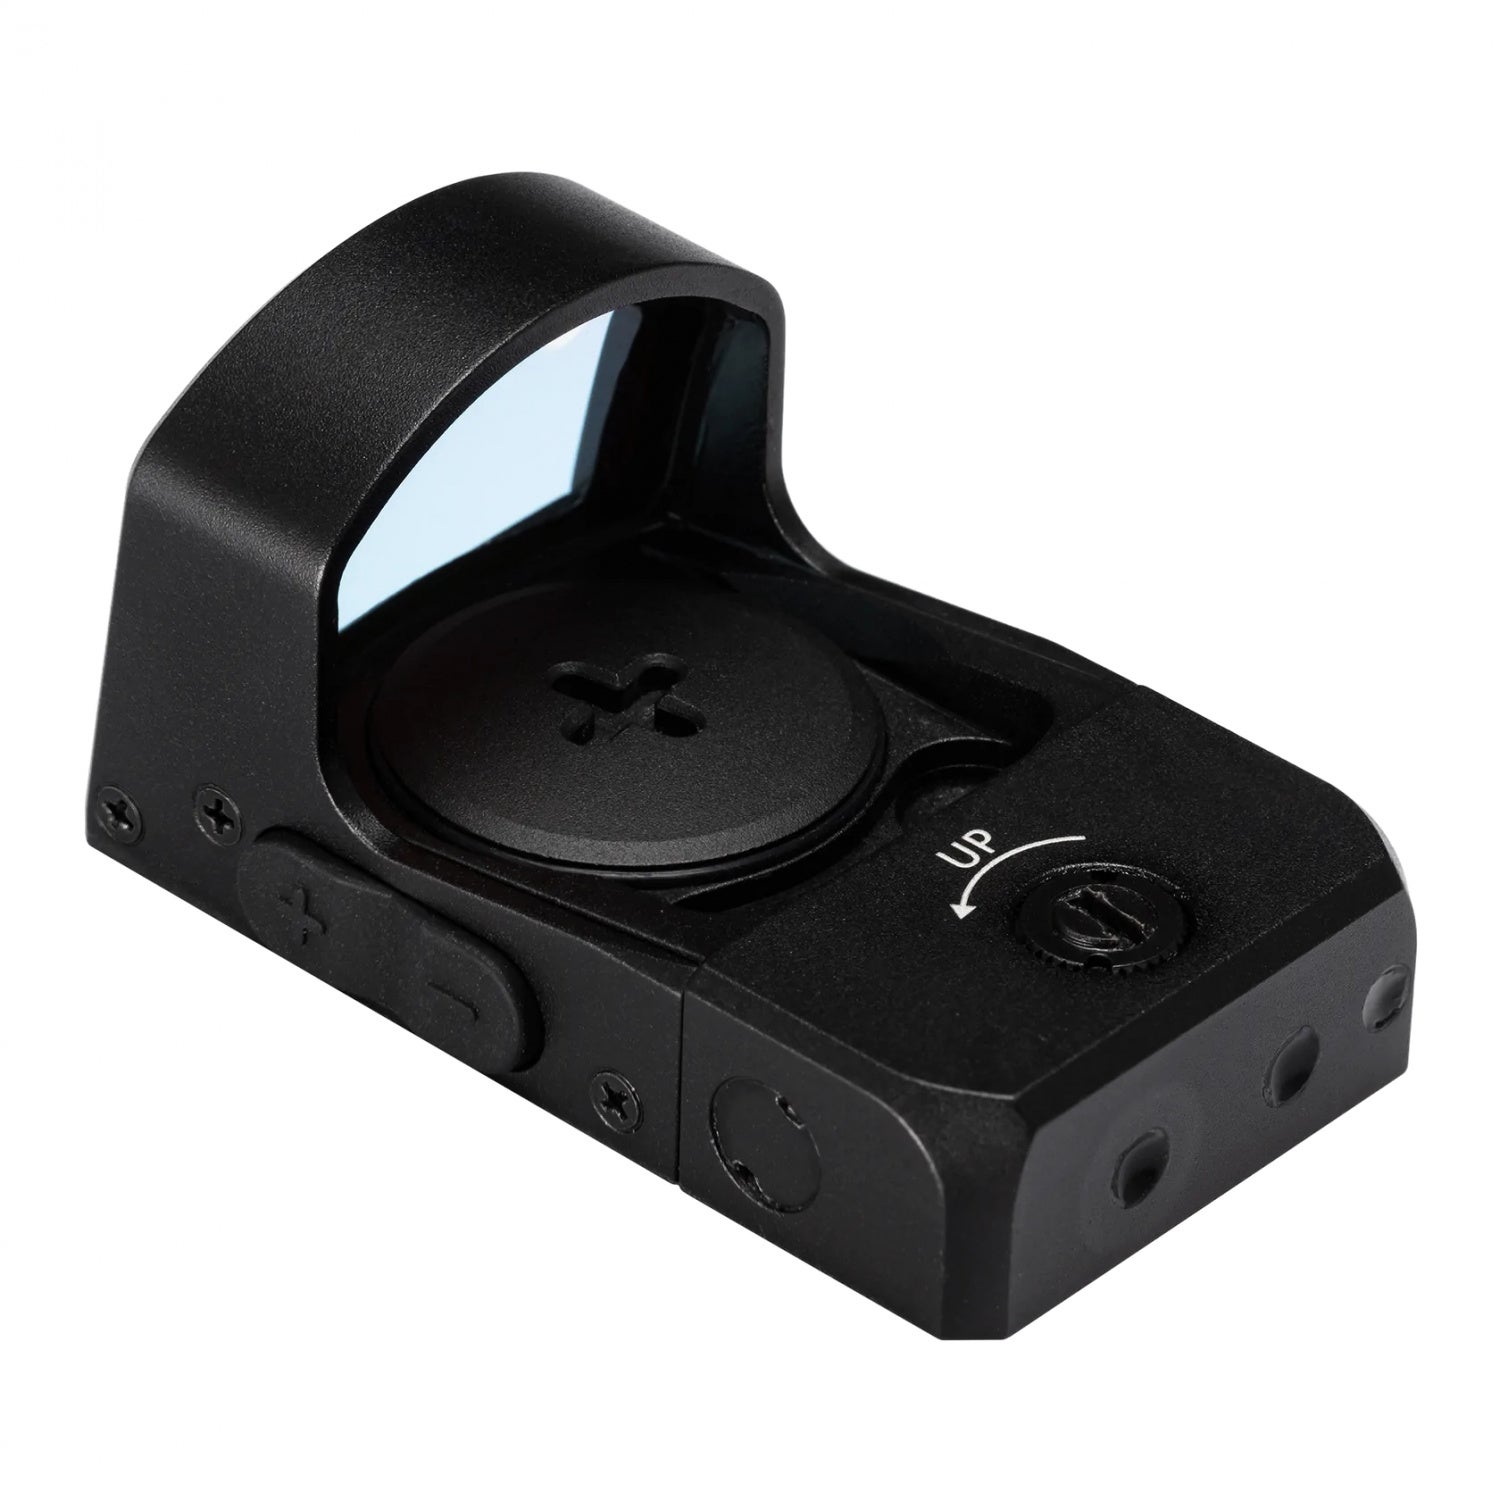 The MeoSight IV is the smallest option in Meopta's red dot lineup.